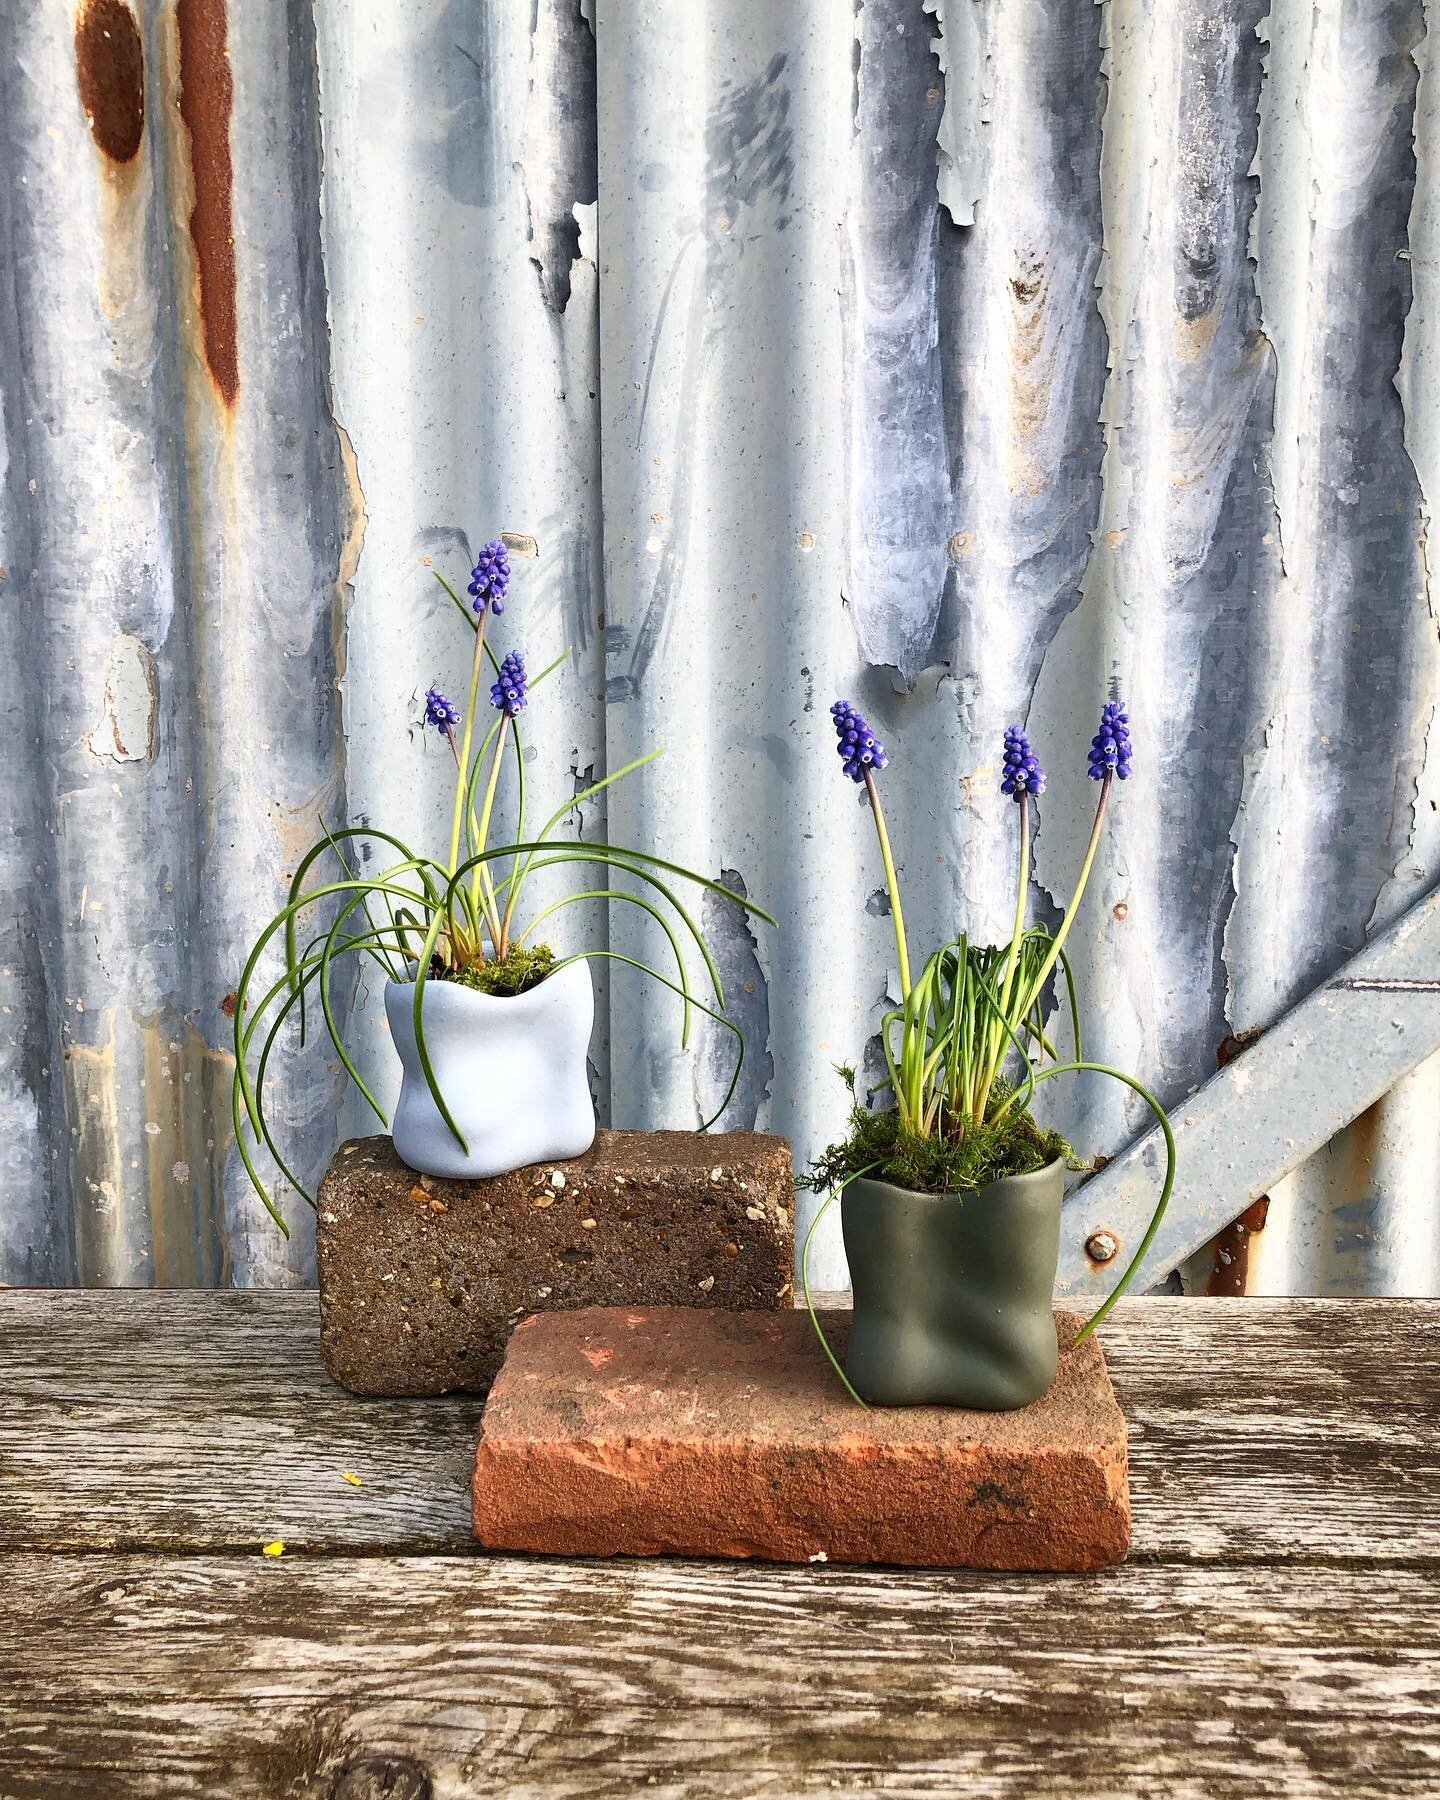 Spring blooms in our candle pots 

We are working to make refills for our candle pots, but for now we&rsquo;ve repurposed ours into spring bulb pots. Added a bit of foraged moss for a cute full look. Some grape hyacinths, crocus&rsquo; and pansies. 
